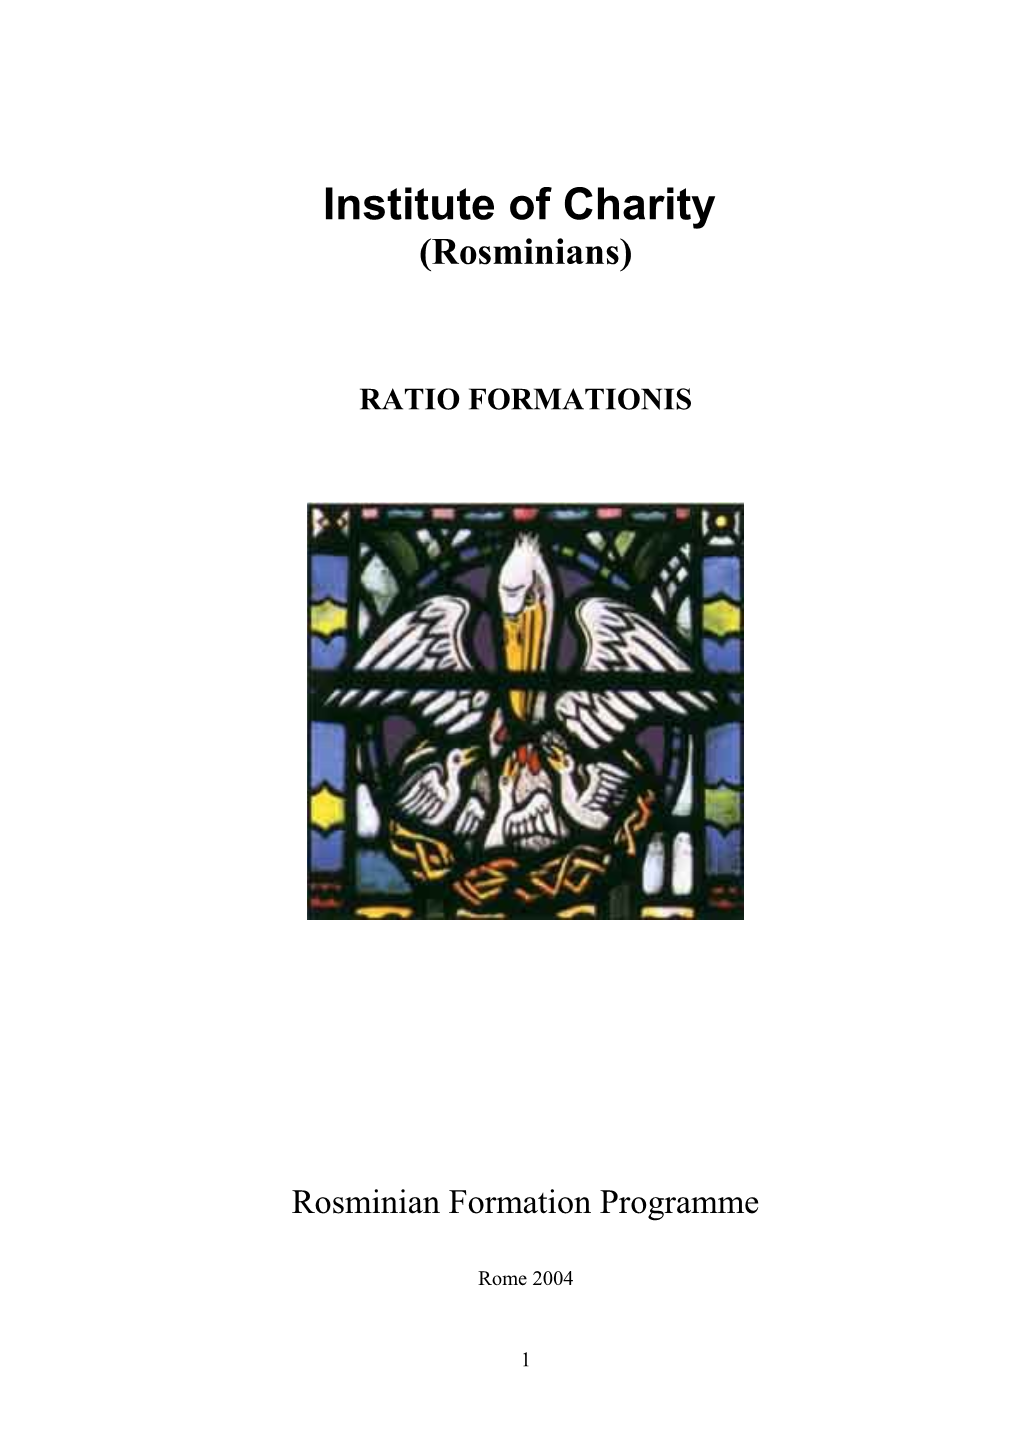 Working Document Towards a Ratio Formationis for the Institute of Charity (06